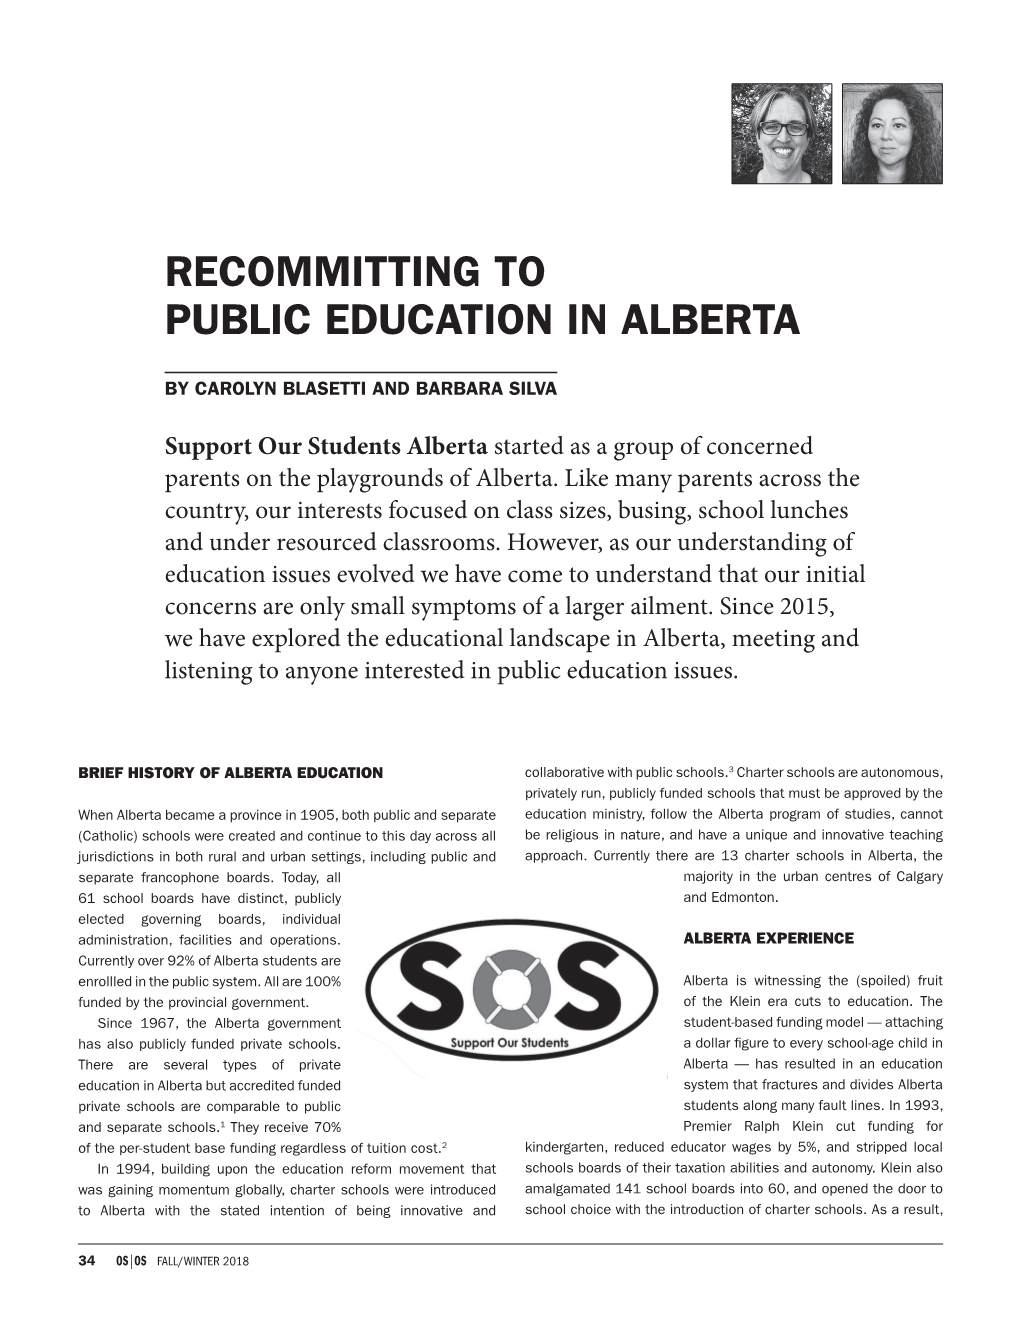 Recommitting to Public Education in Alberta